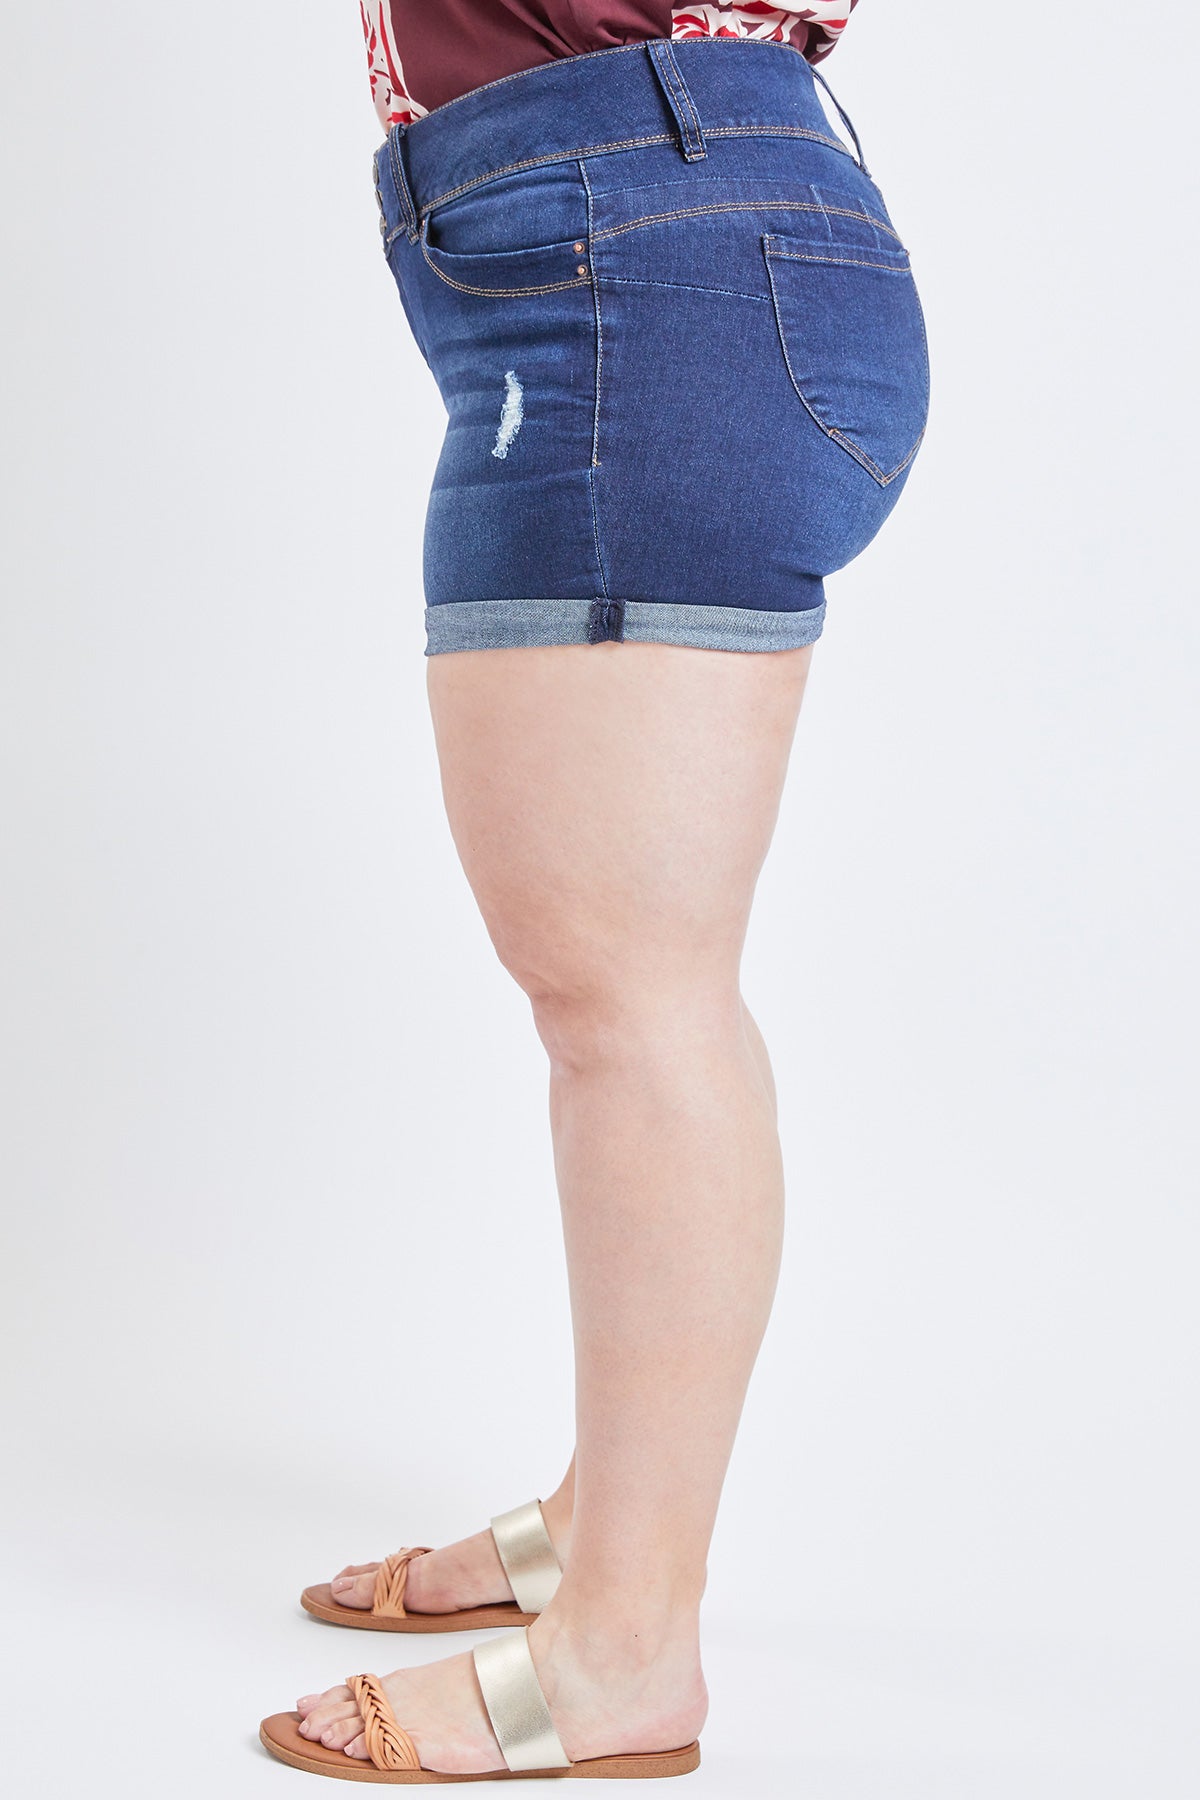 Missy Plus Size Wannabettabutt 3-Button Cuffed Shorts Made With Recycled Fibers 12 Pack